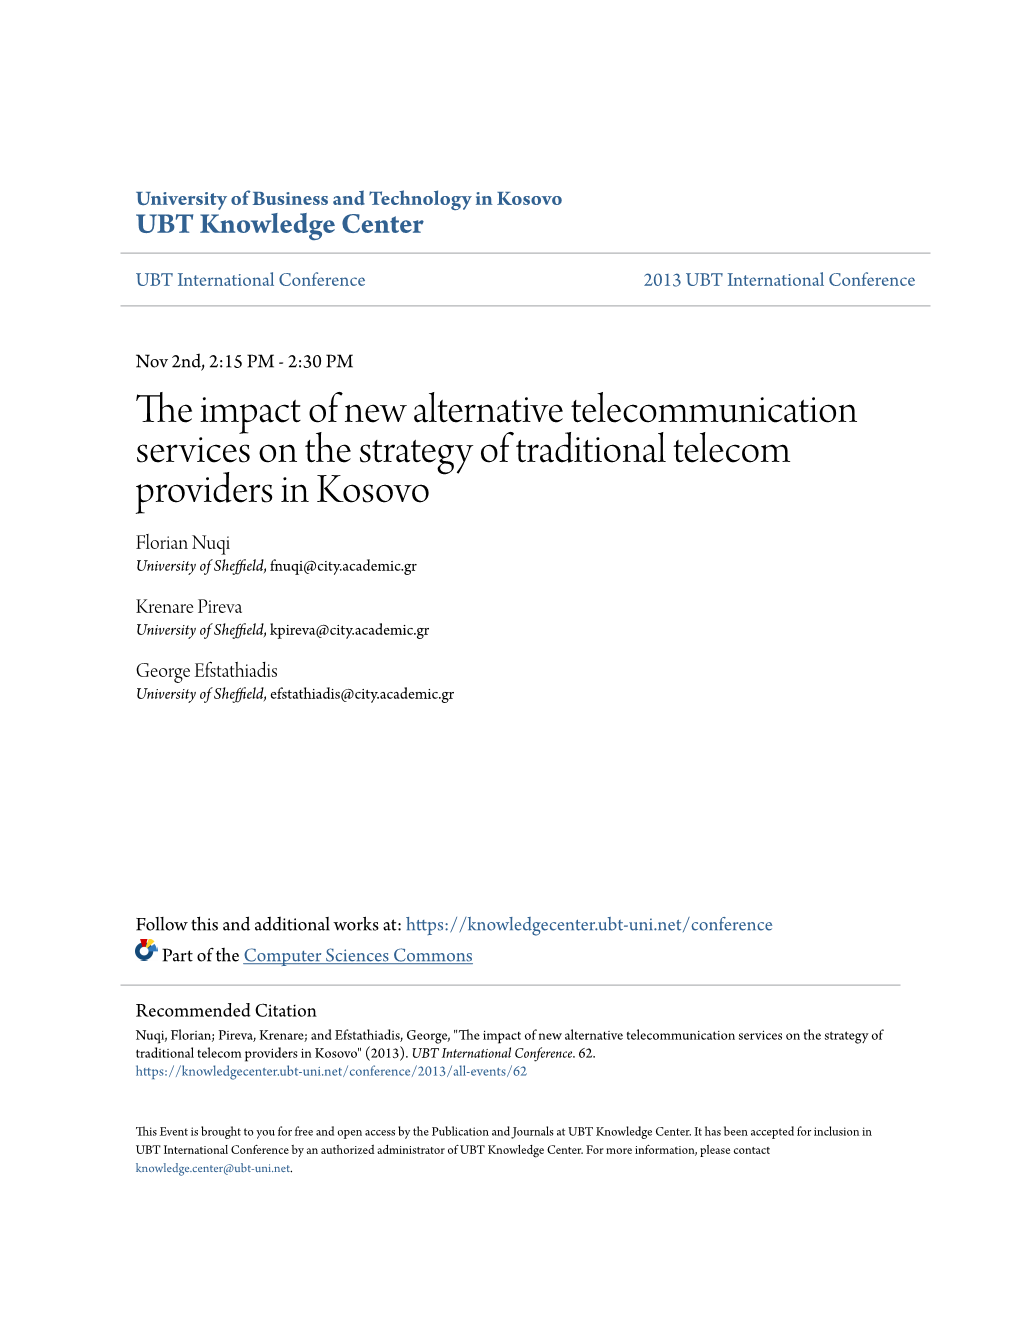 The Impact of New Alternative Telecommunication Services on The